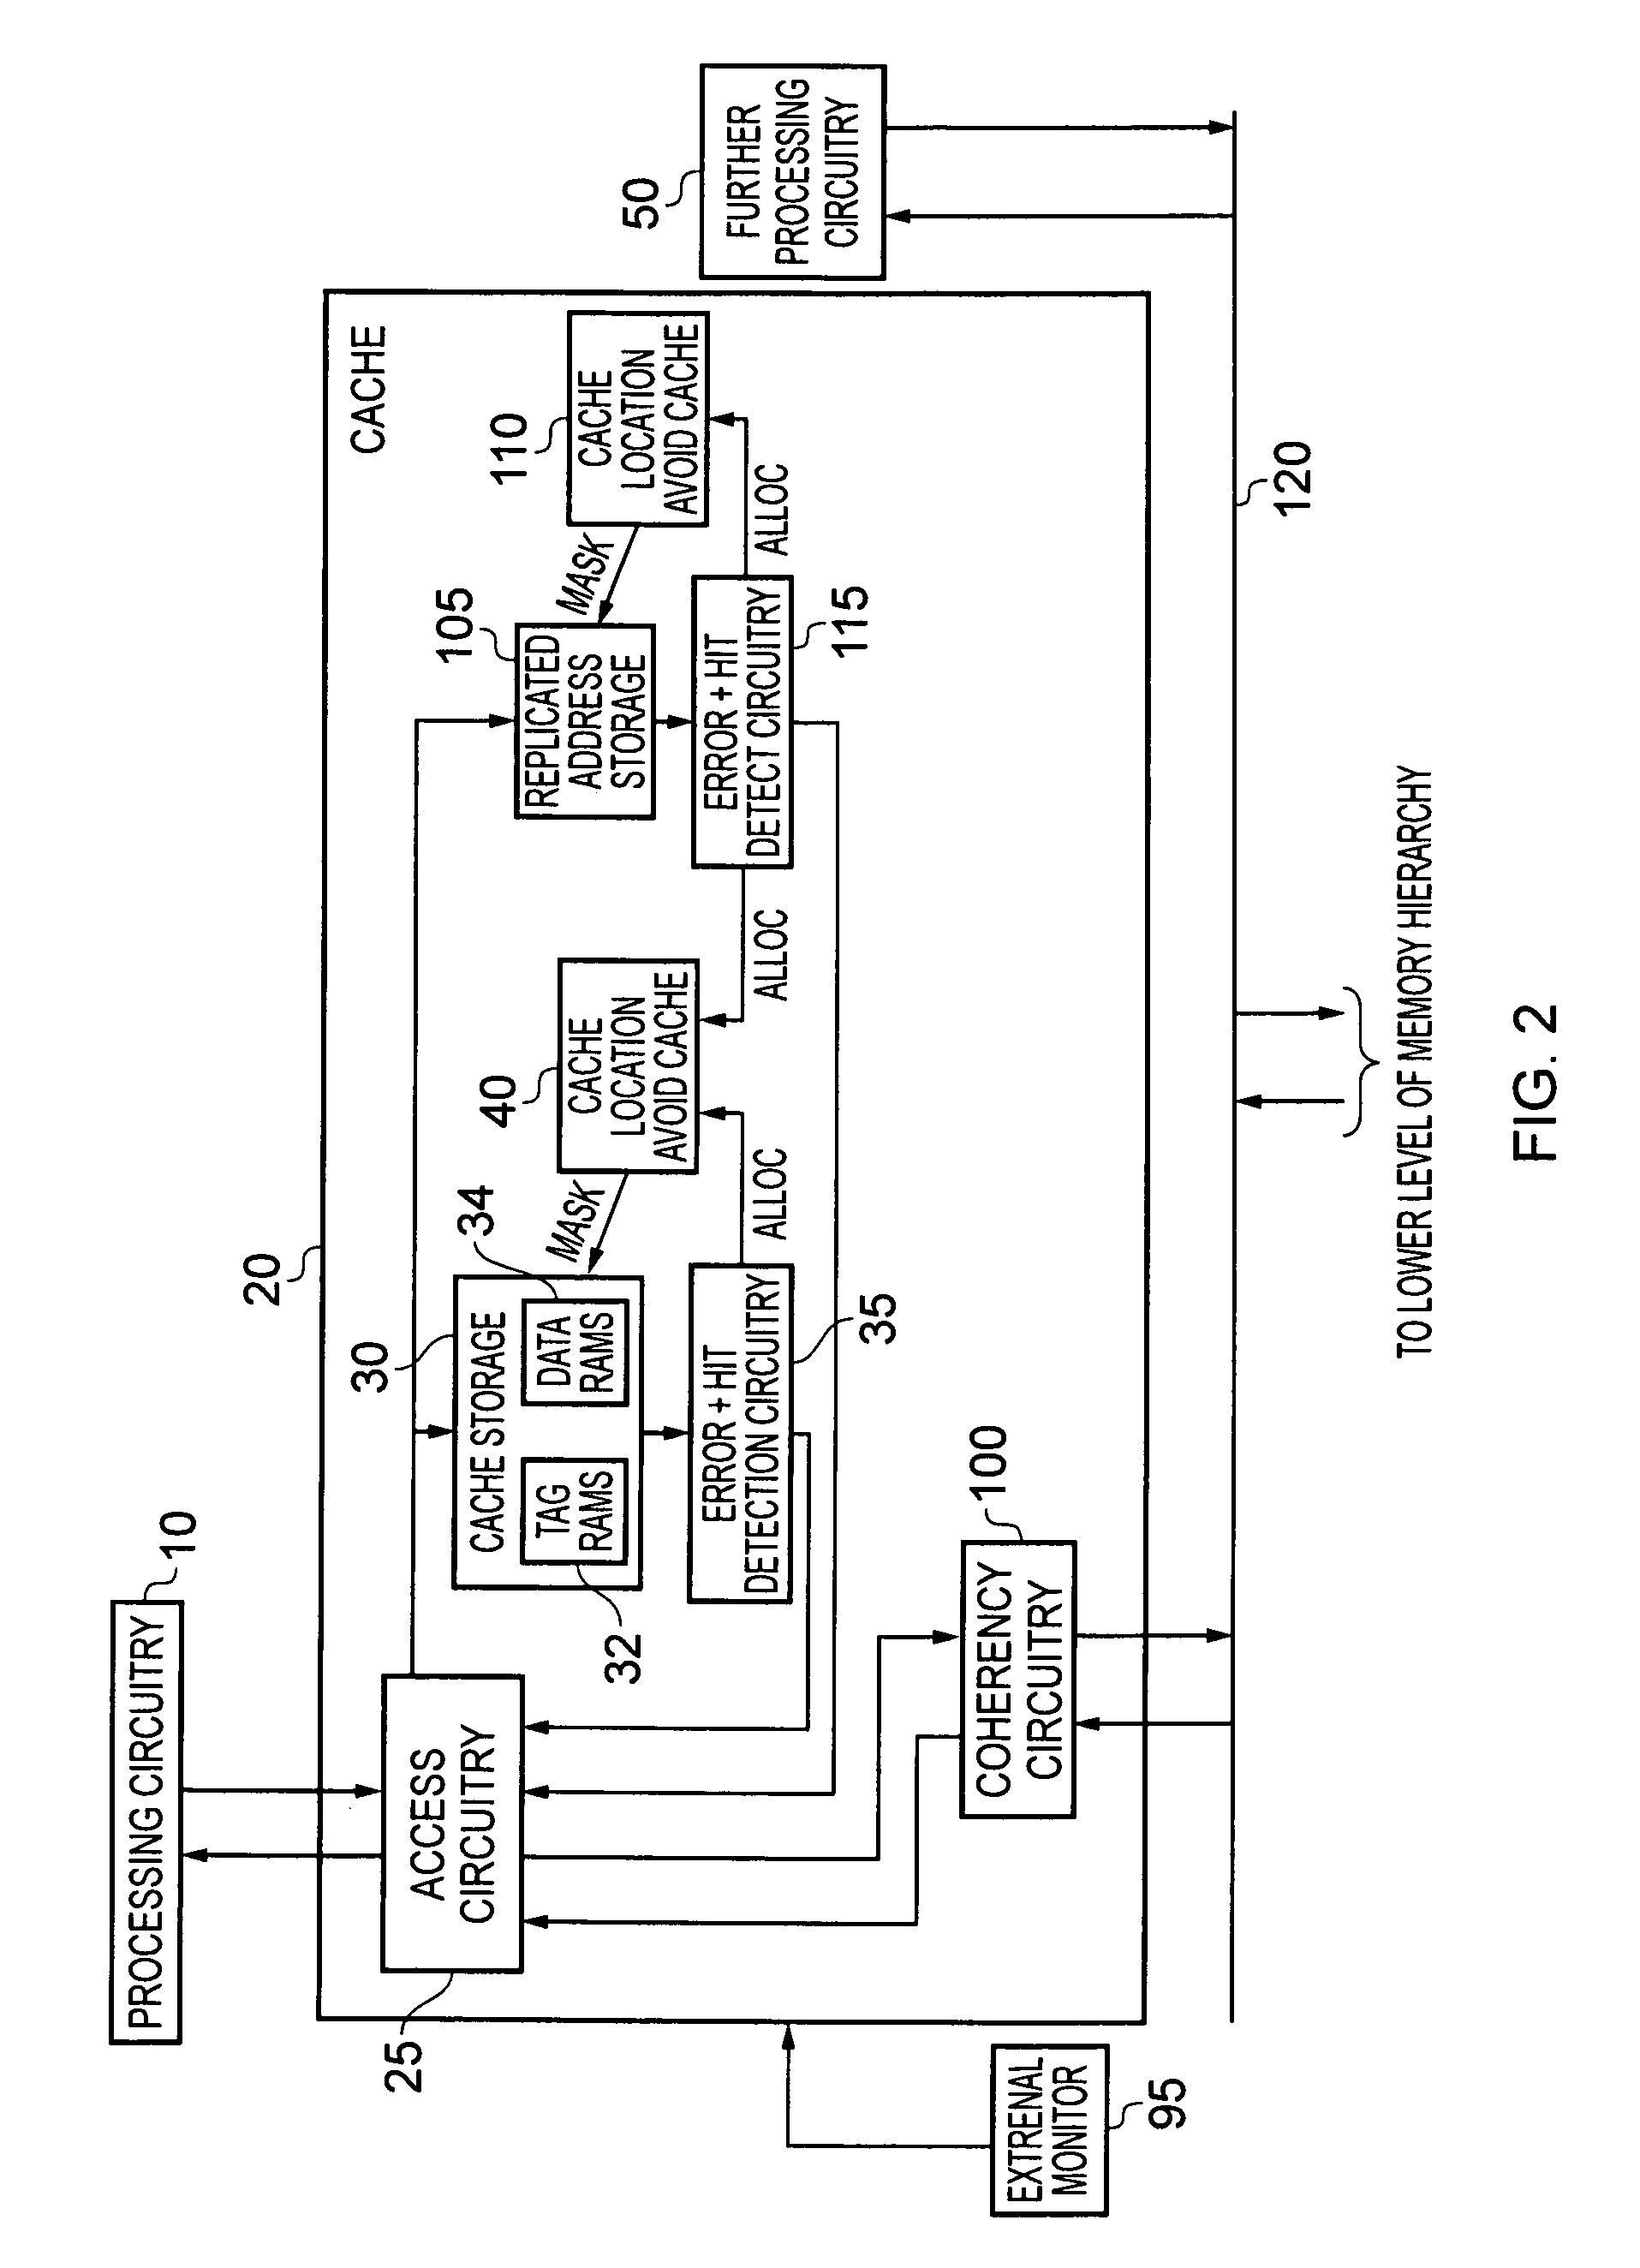 Handling of errors in a data processing apparatus having a cache storage and a replicated address storage